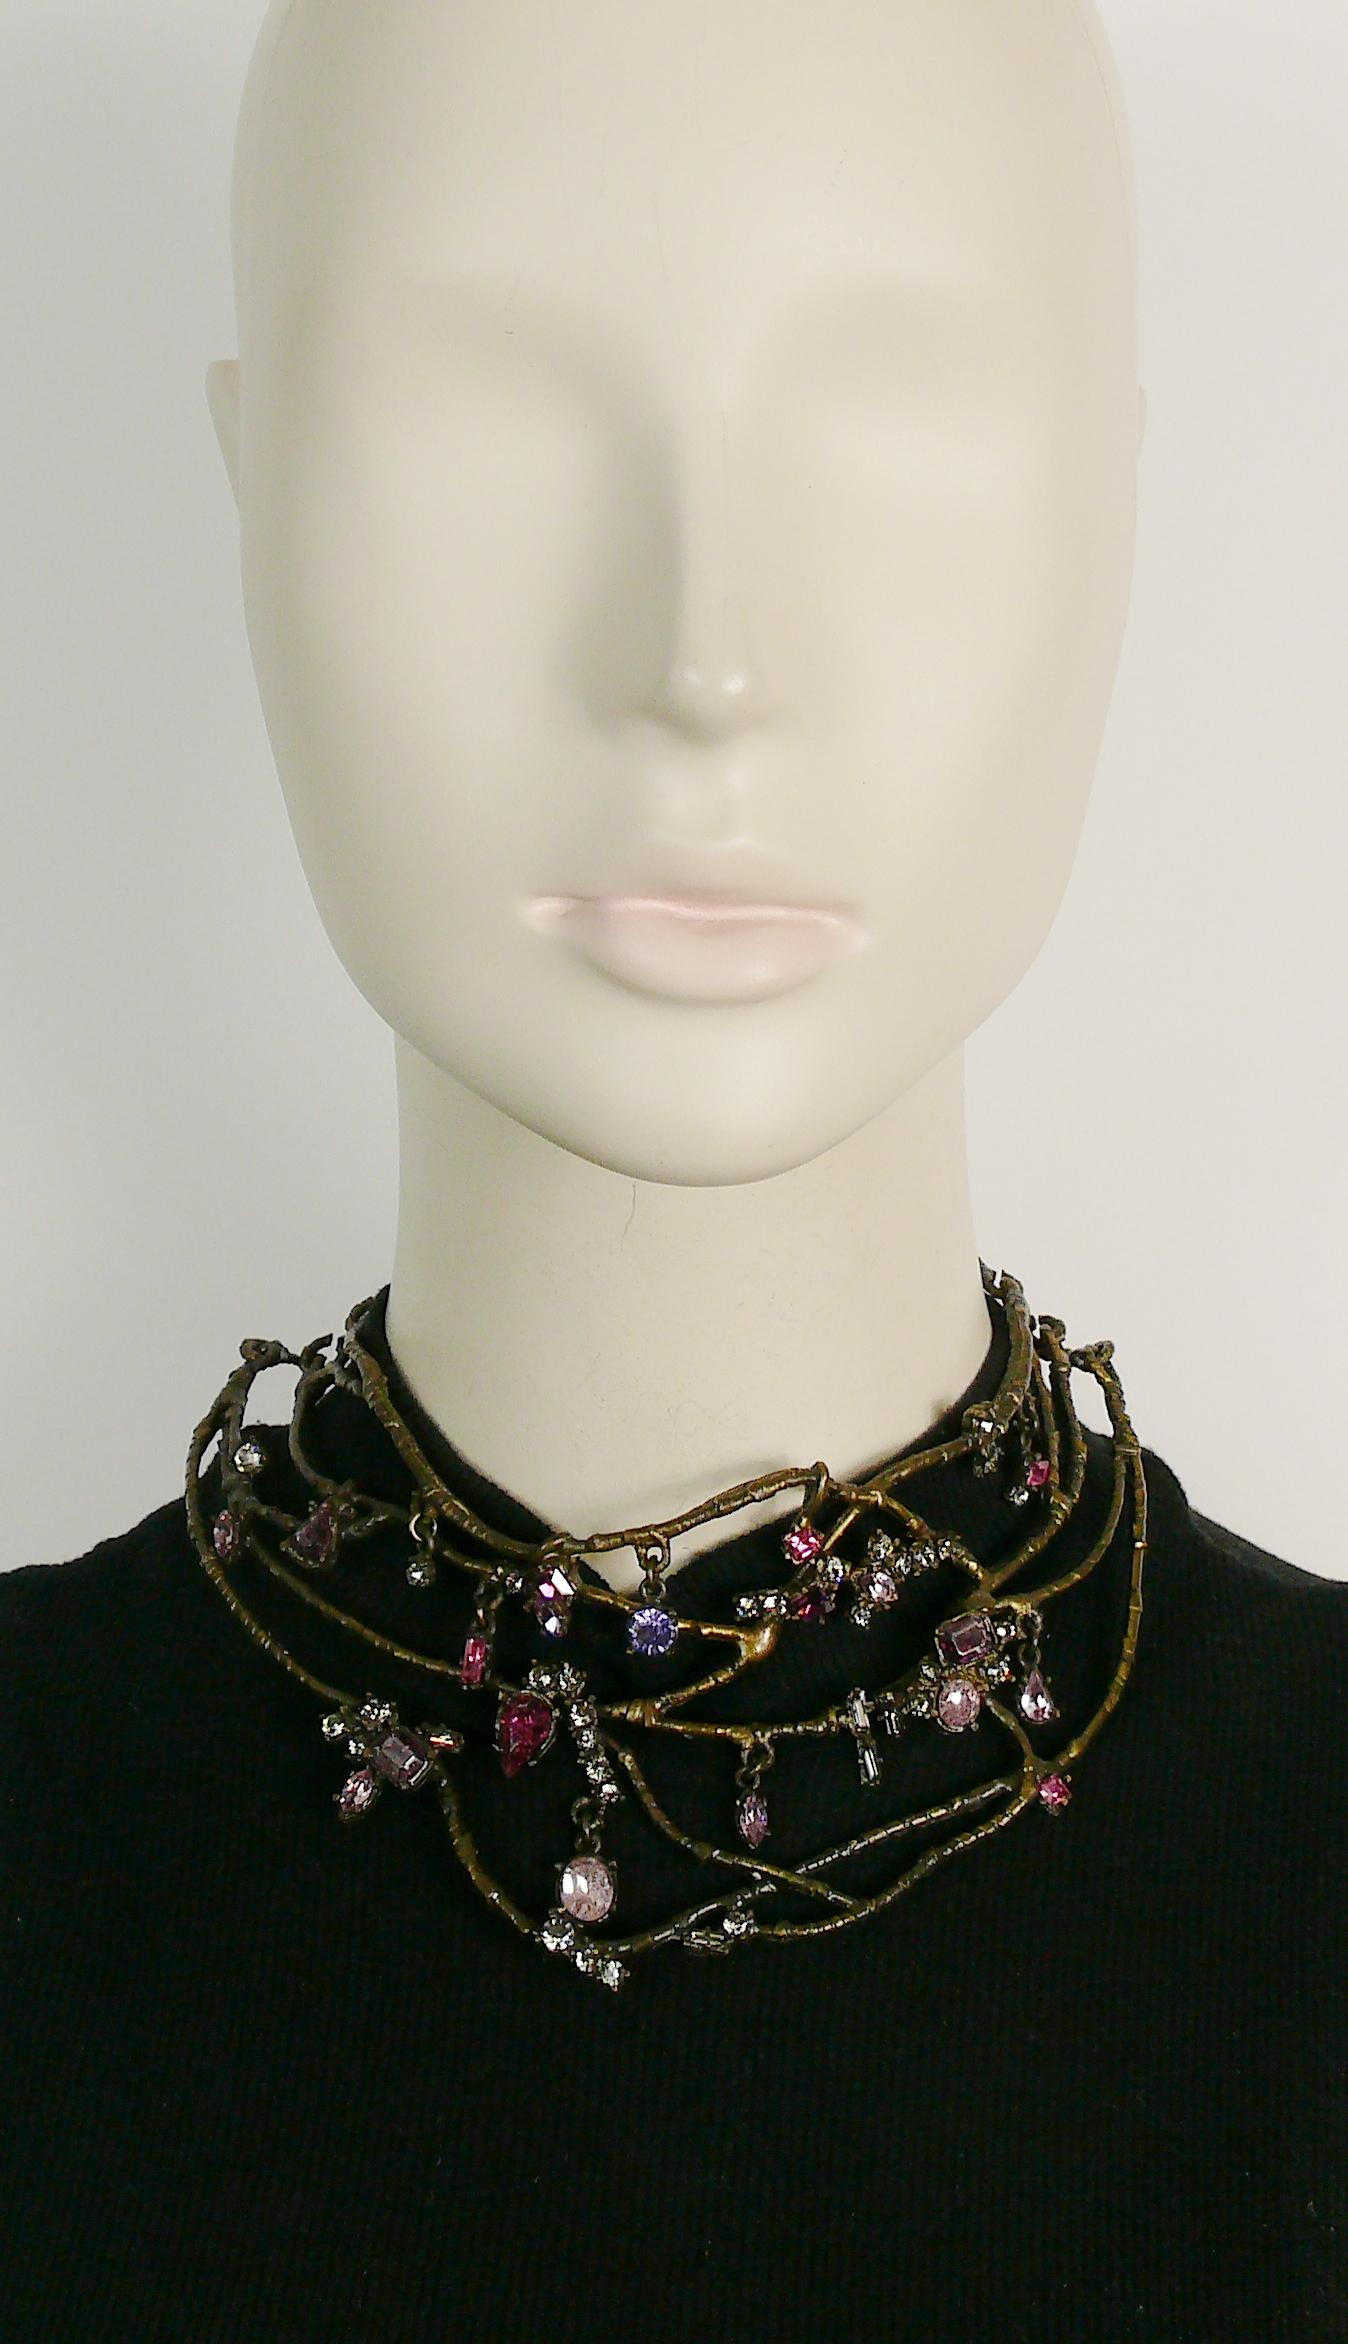 CHRISTIAN LACROIX vintage antiqued bronze toned choker necklace featuring intertwined branches embellished with multicolored crystals (some with an original cracked pattern).

T-bar closure.
Extension chain.

Marked CHRISTIAN LACROIX CL Made in